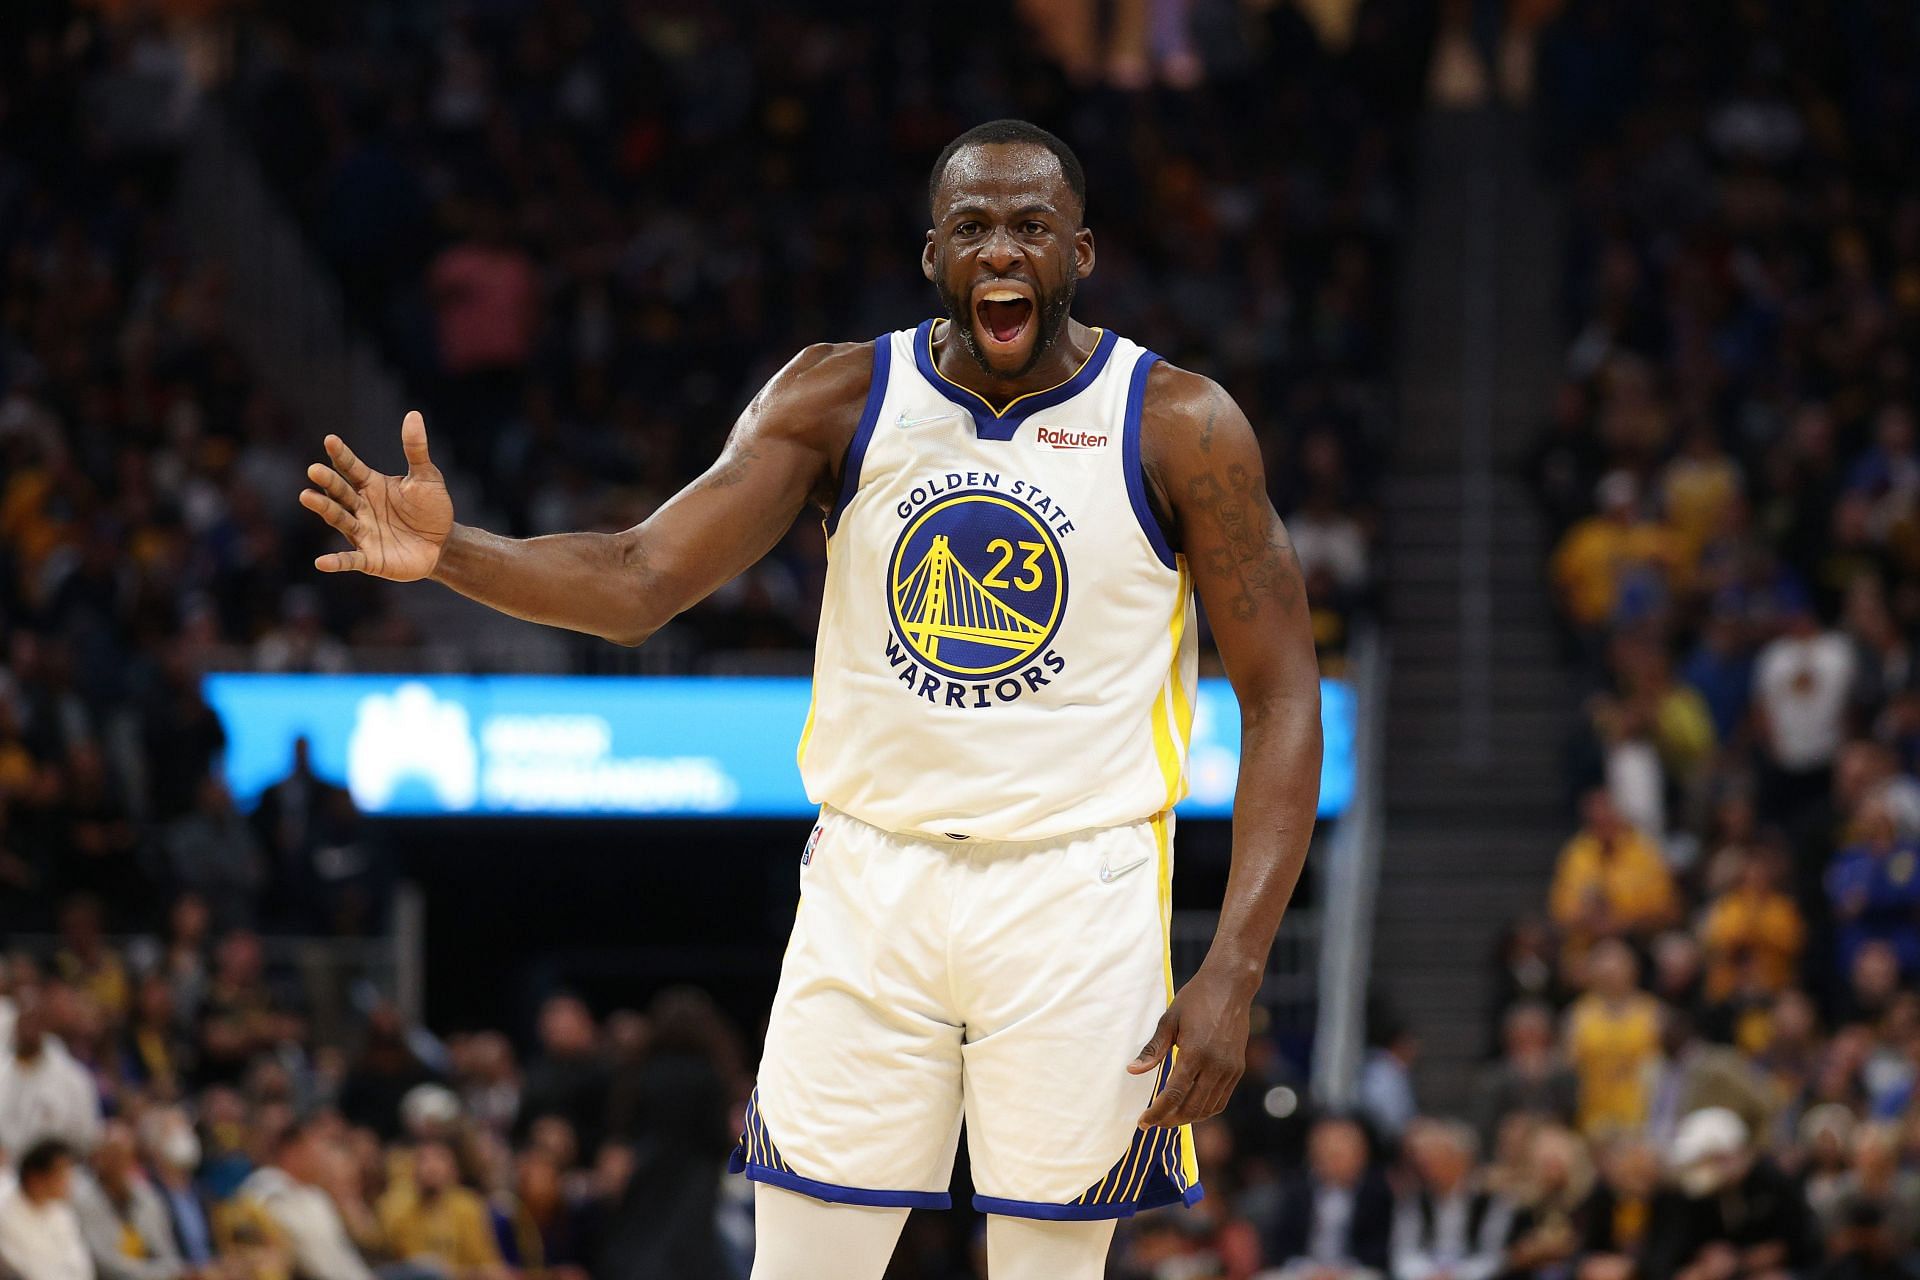 Draymond Green of the Golden State Warriors complains about a call during the first half of Game 4.